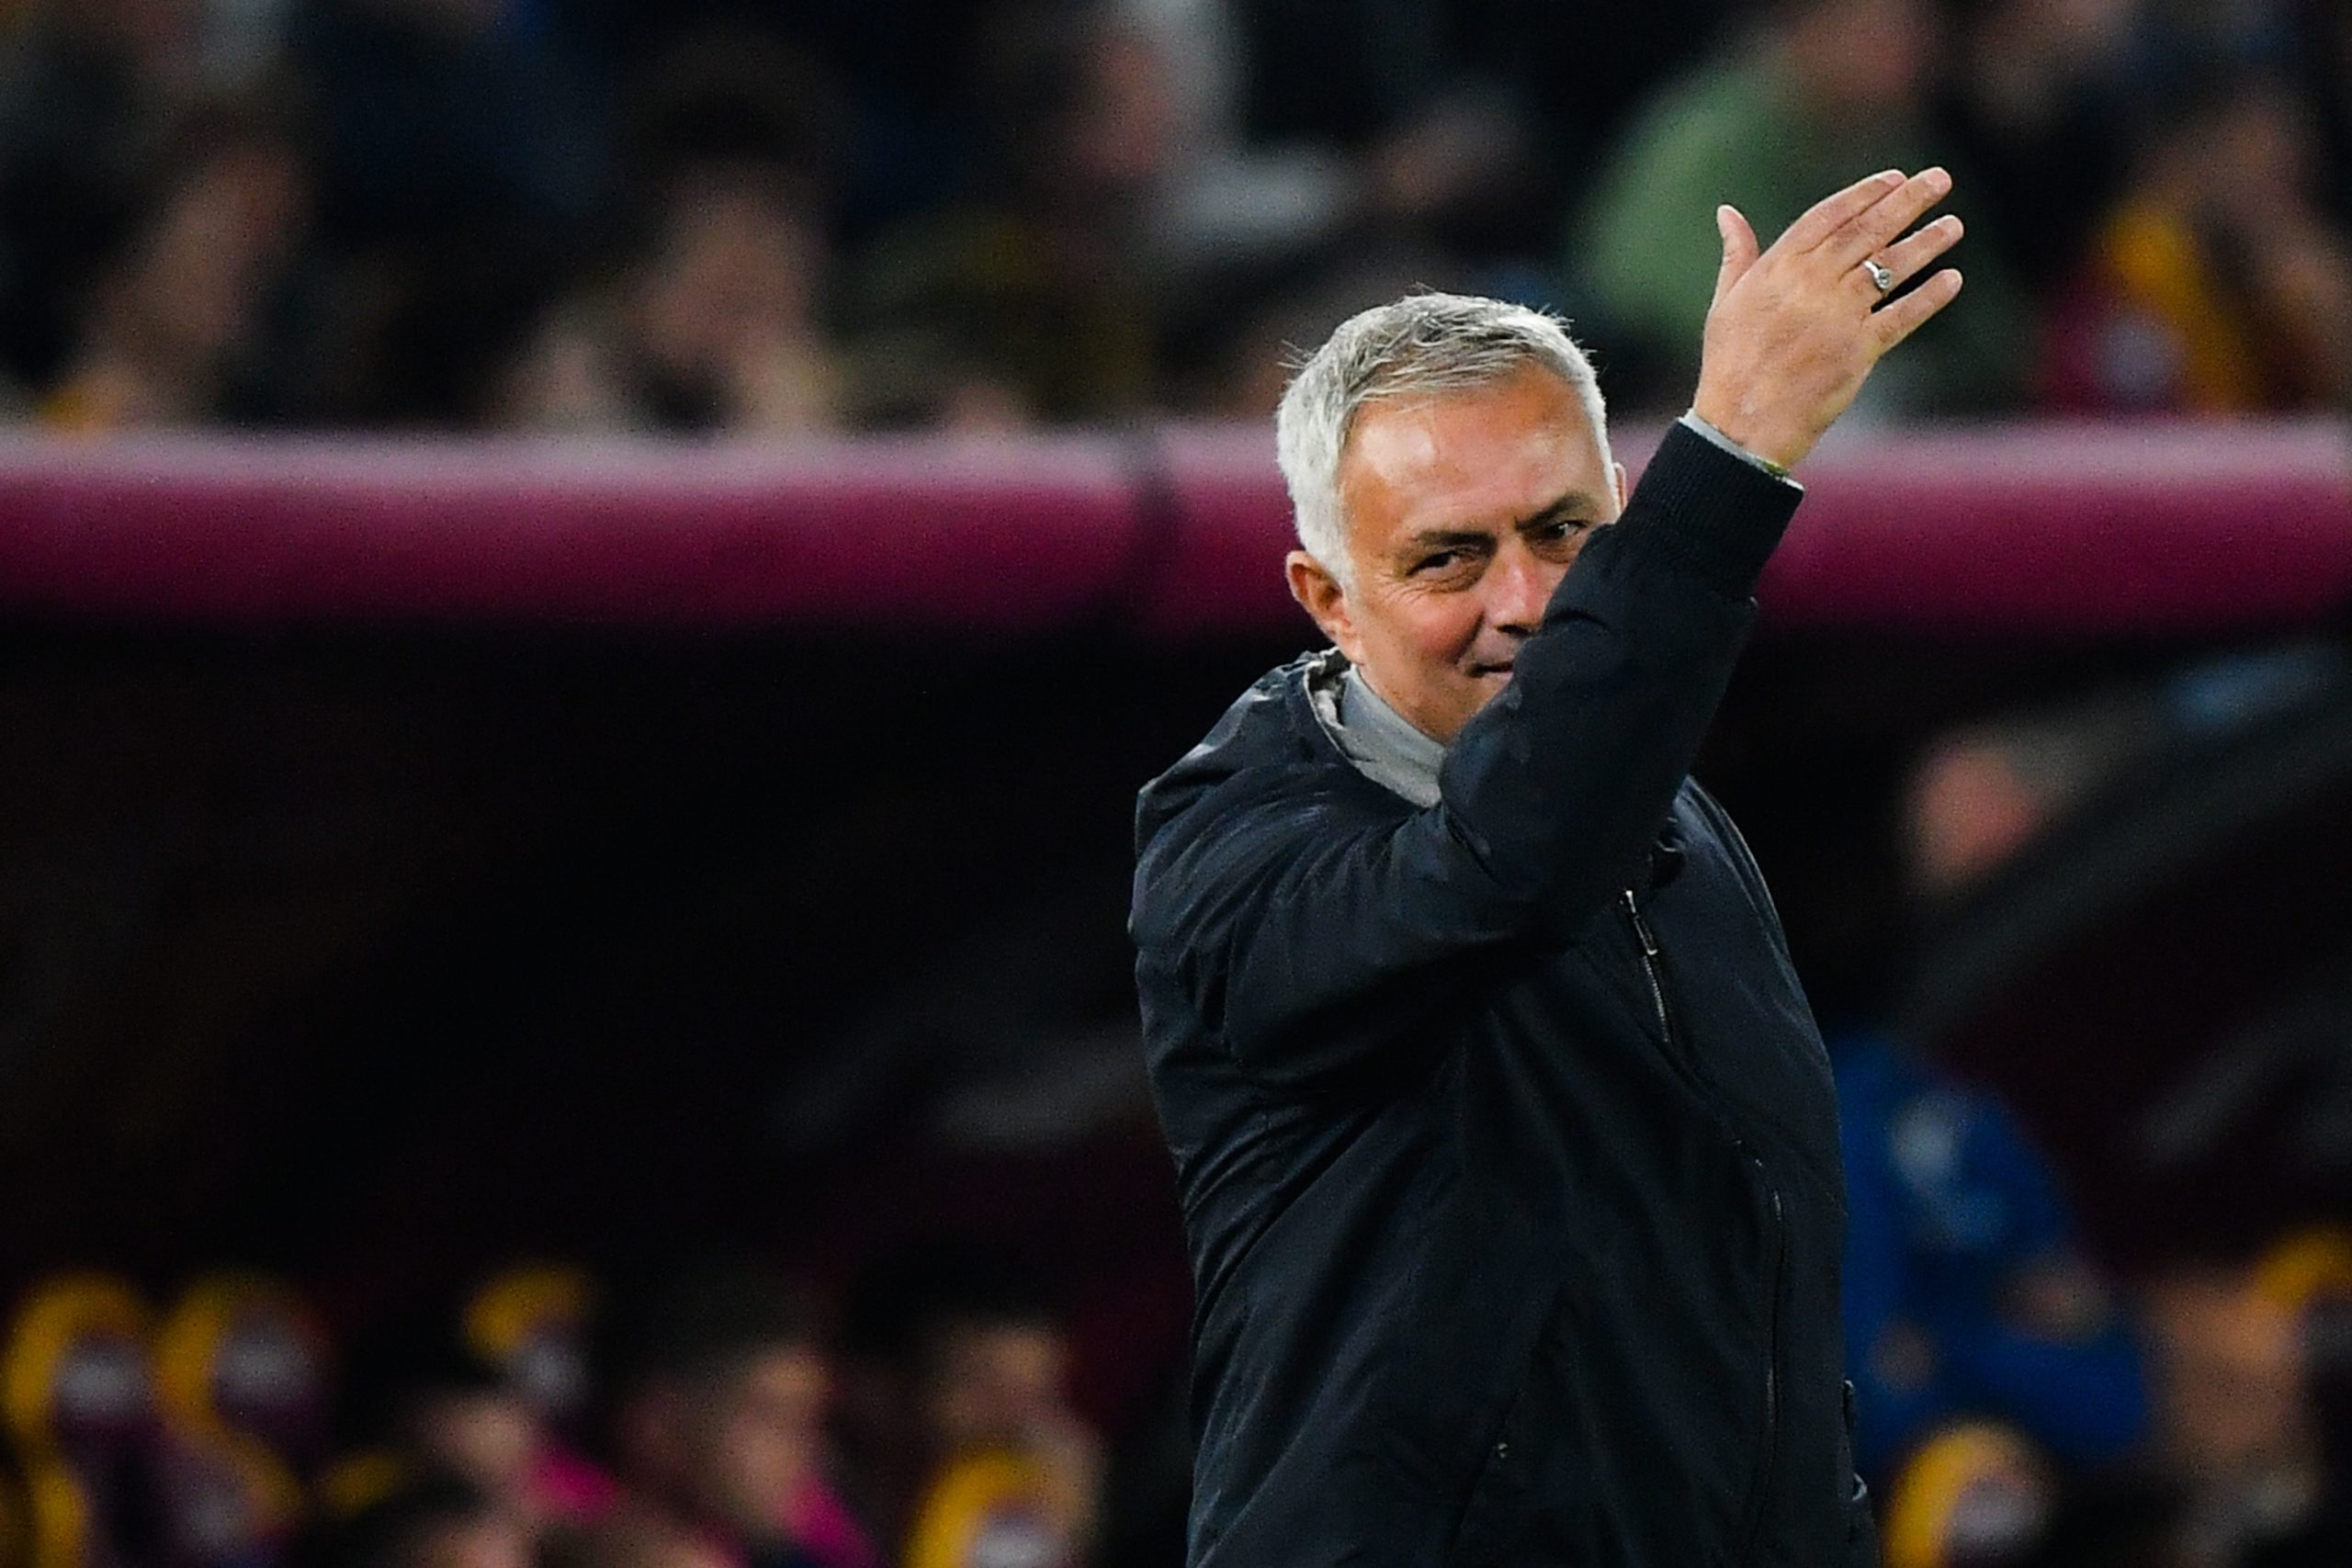 Roma are in a full-fledged crisis following the 1-4 loss to Genoa, but the trust of the management in José Mourinho isn’t wavering at this stage.